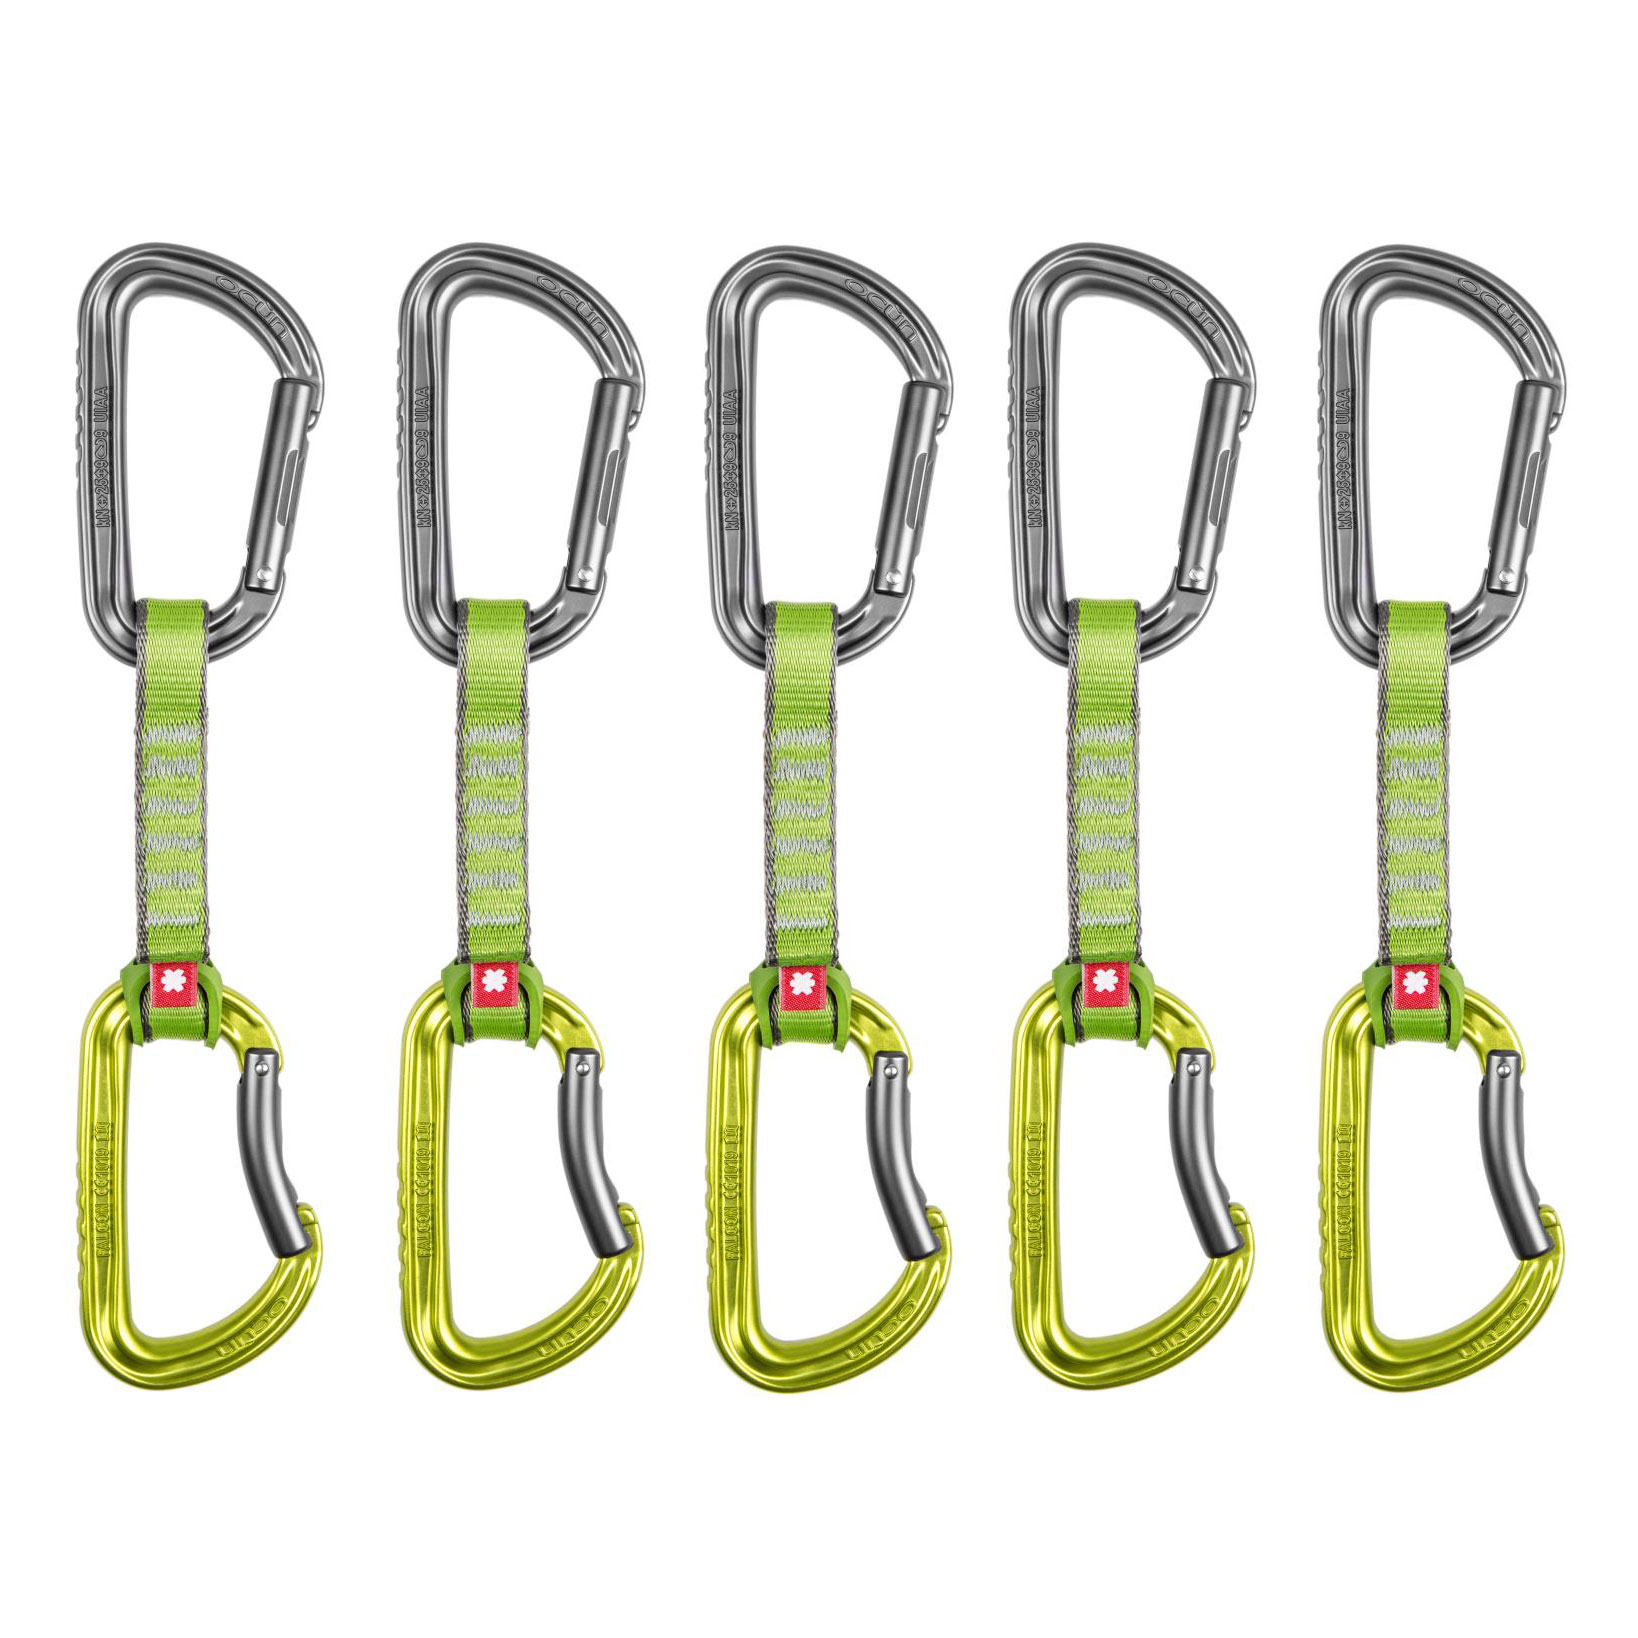 Picture of Ocún Falcon QD Pa 16 mm 10 cm Quickdraw Set - 5 Pack - green